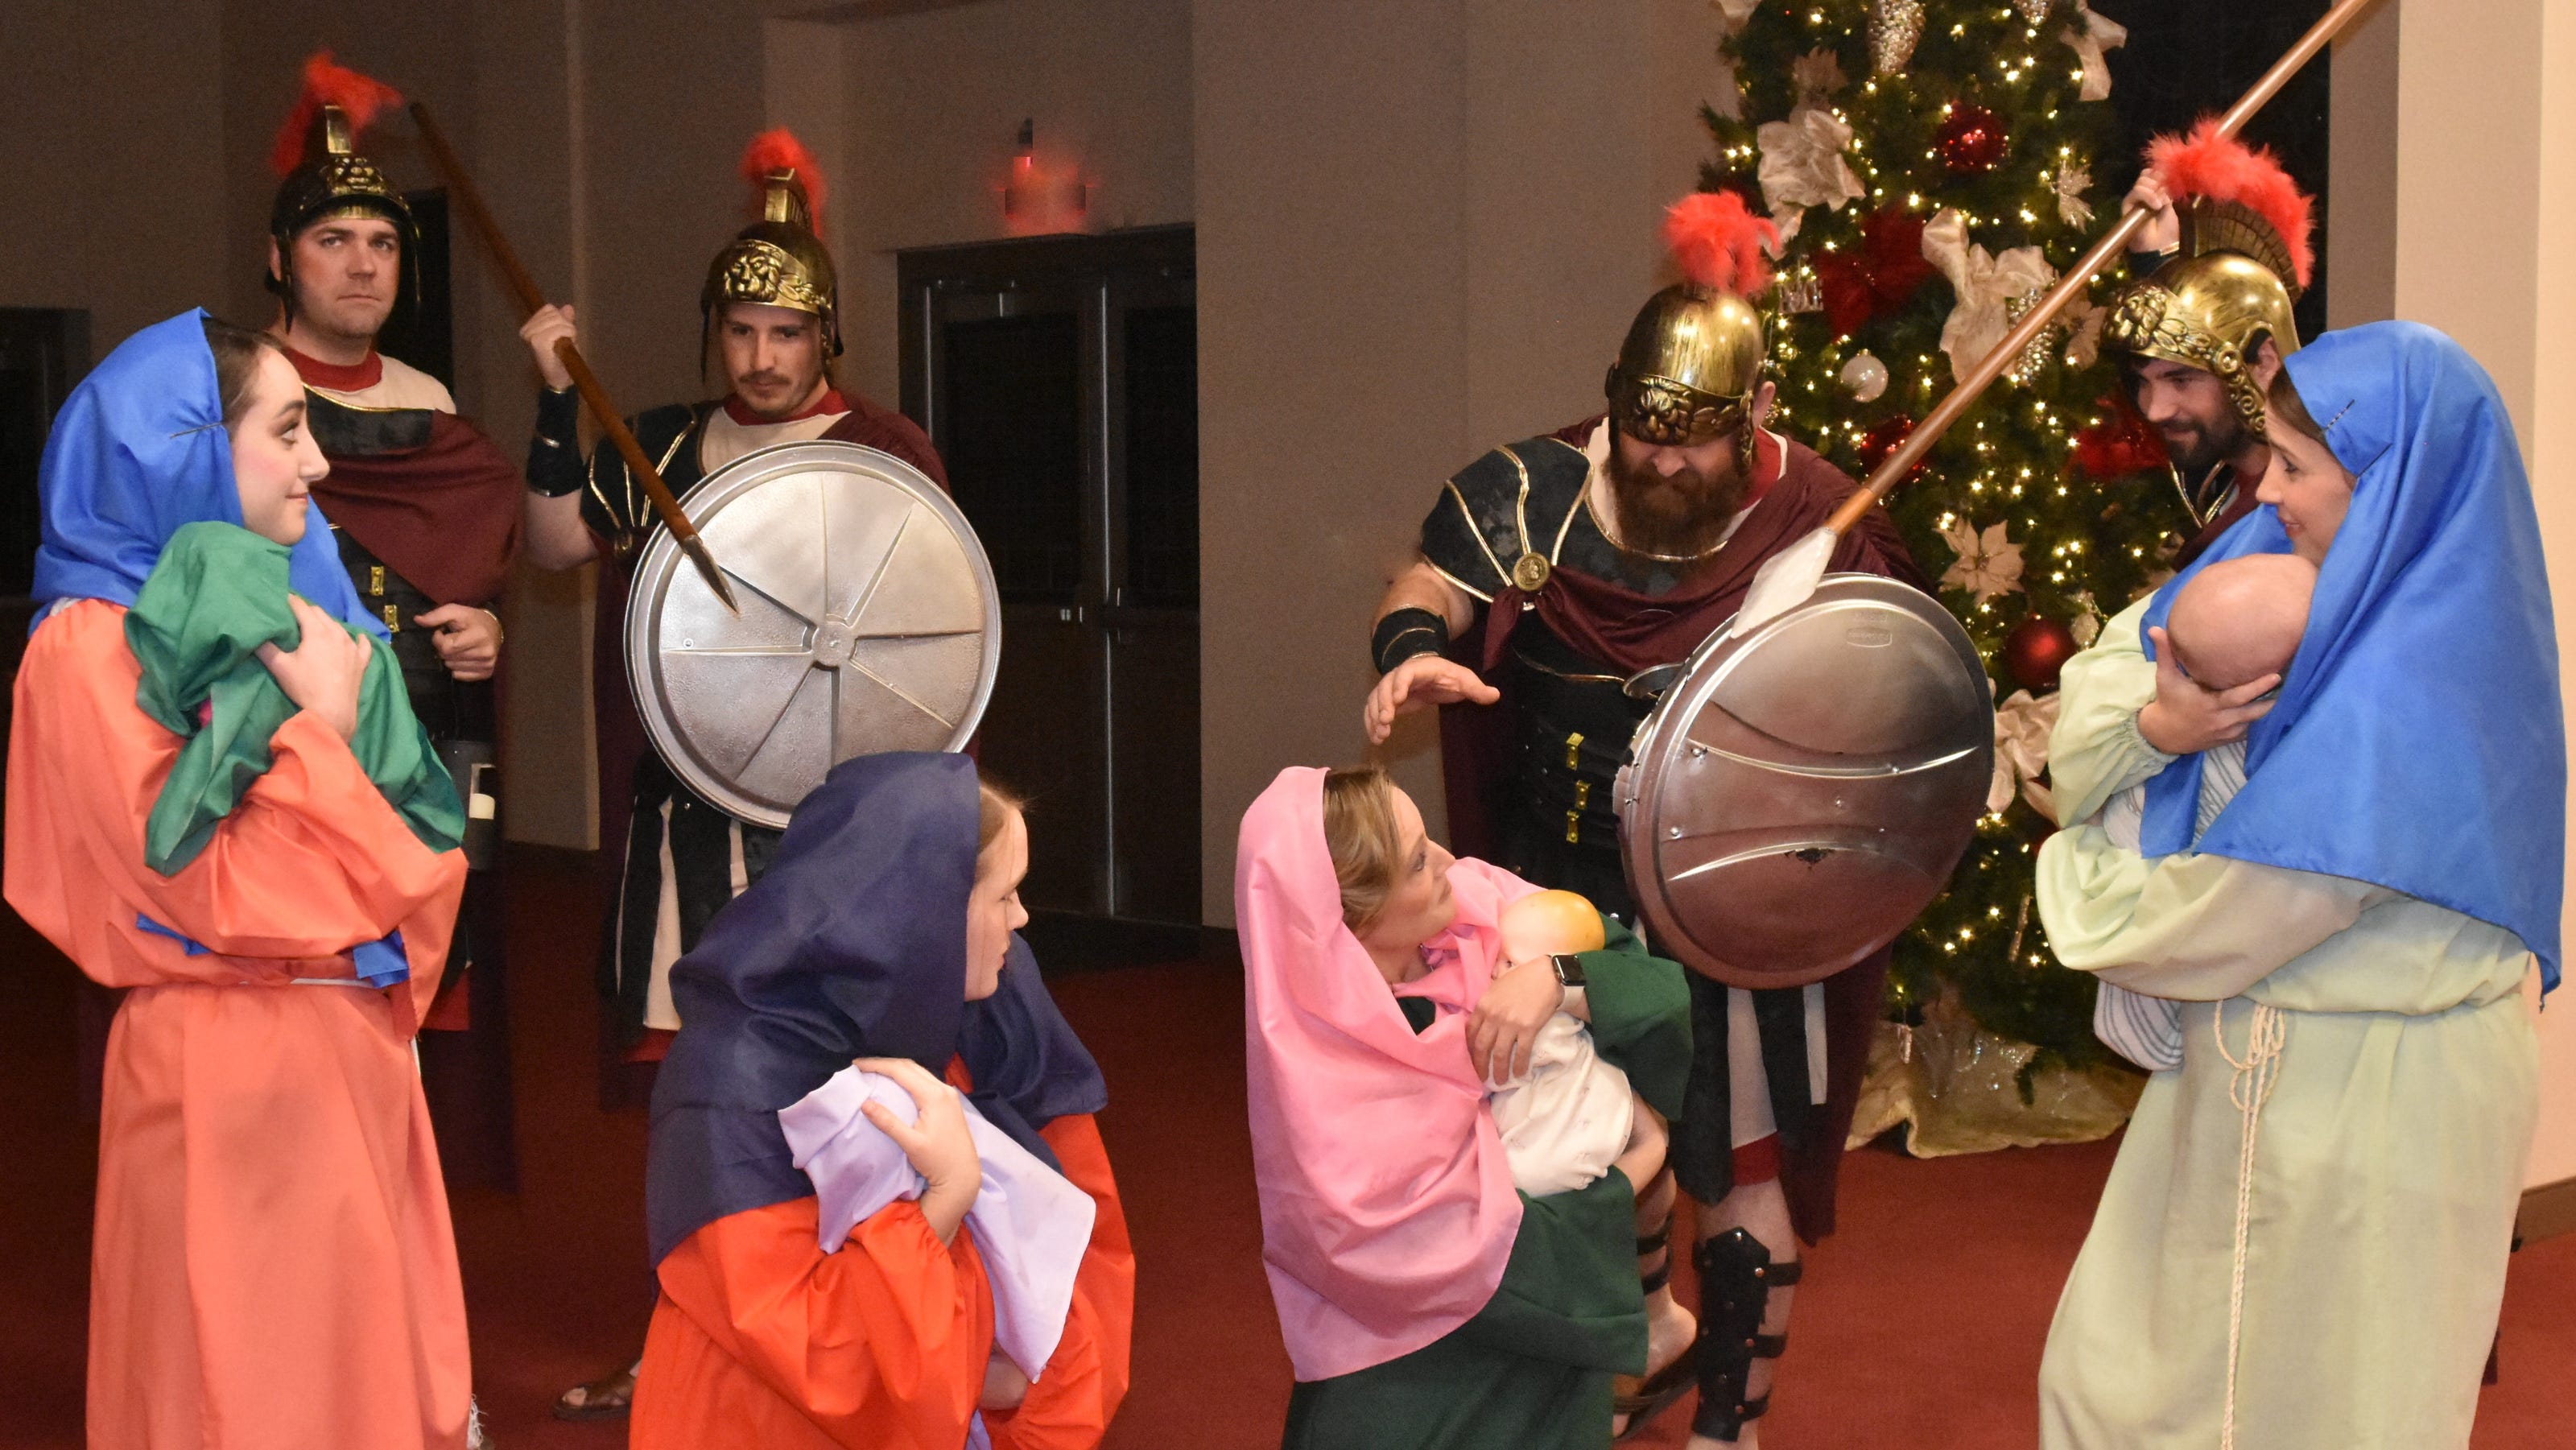  Christmas in Nazareth: Texas village named for Jesus' hometown hosts pageant 